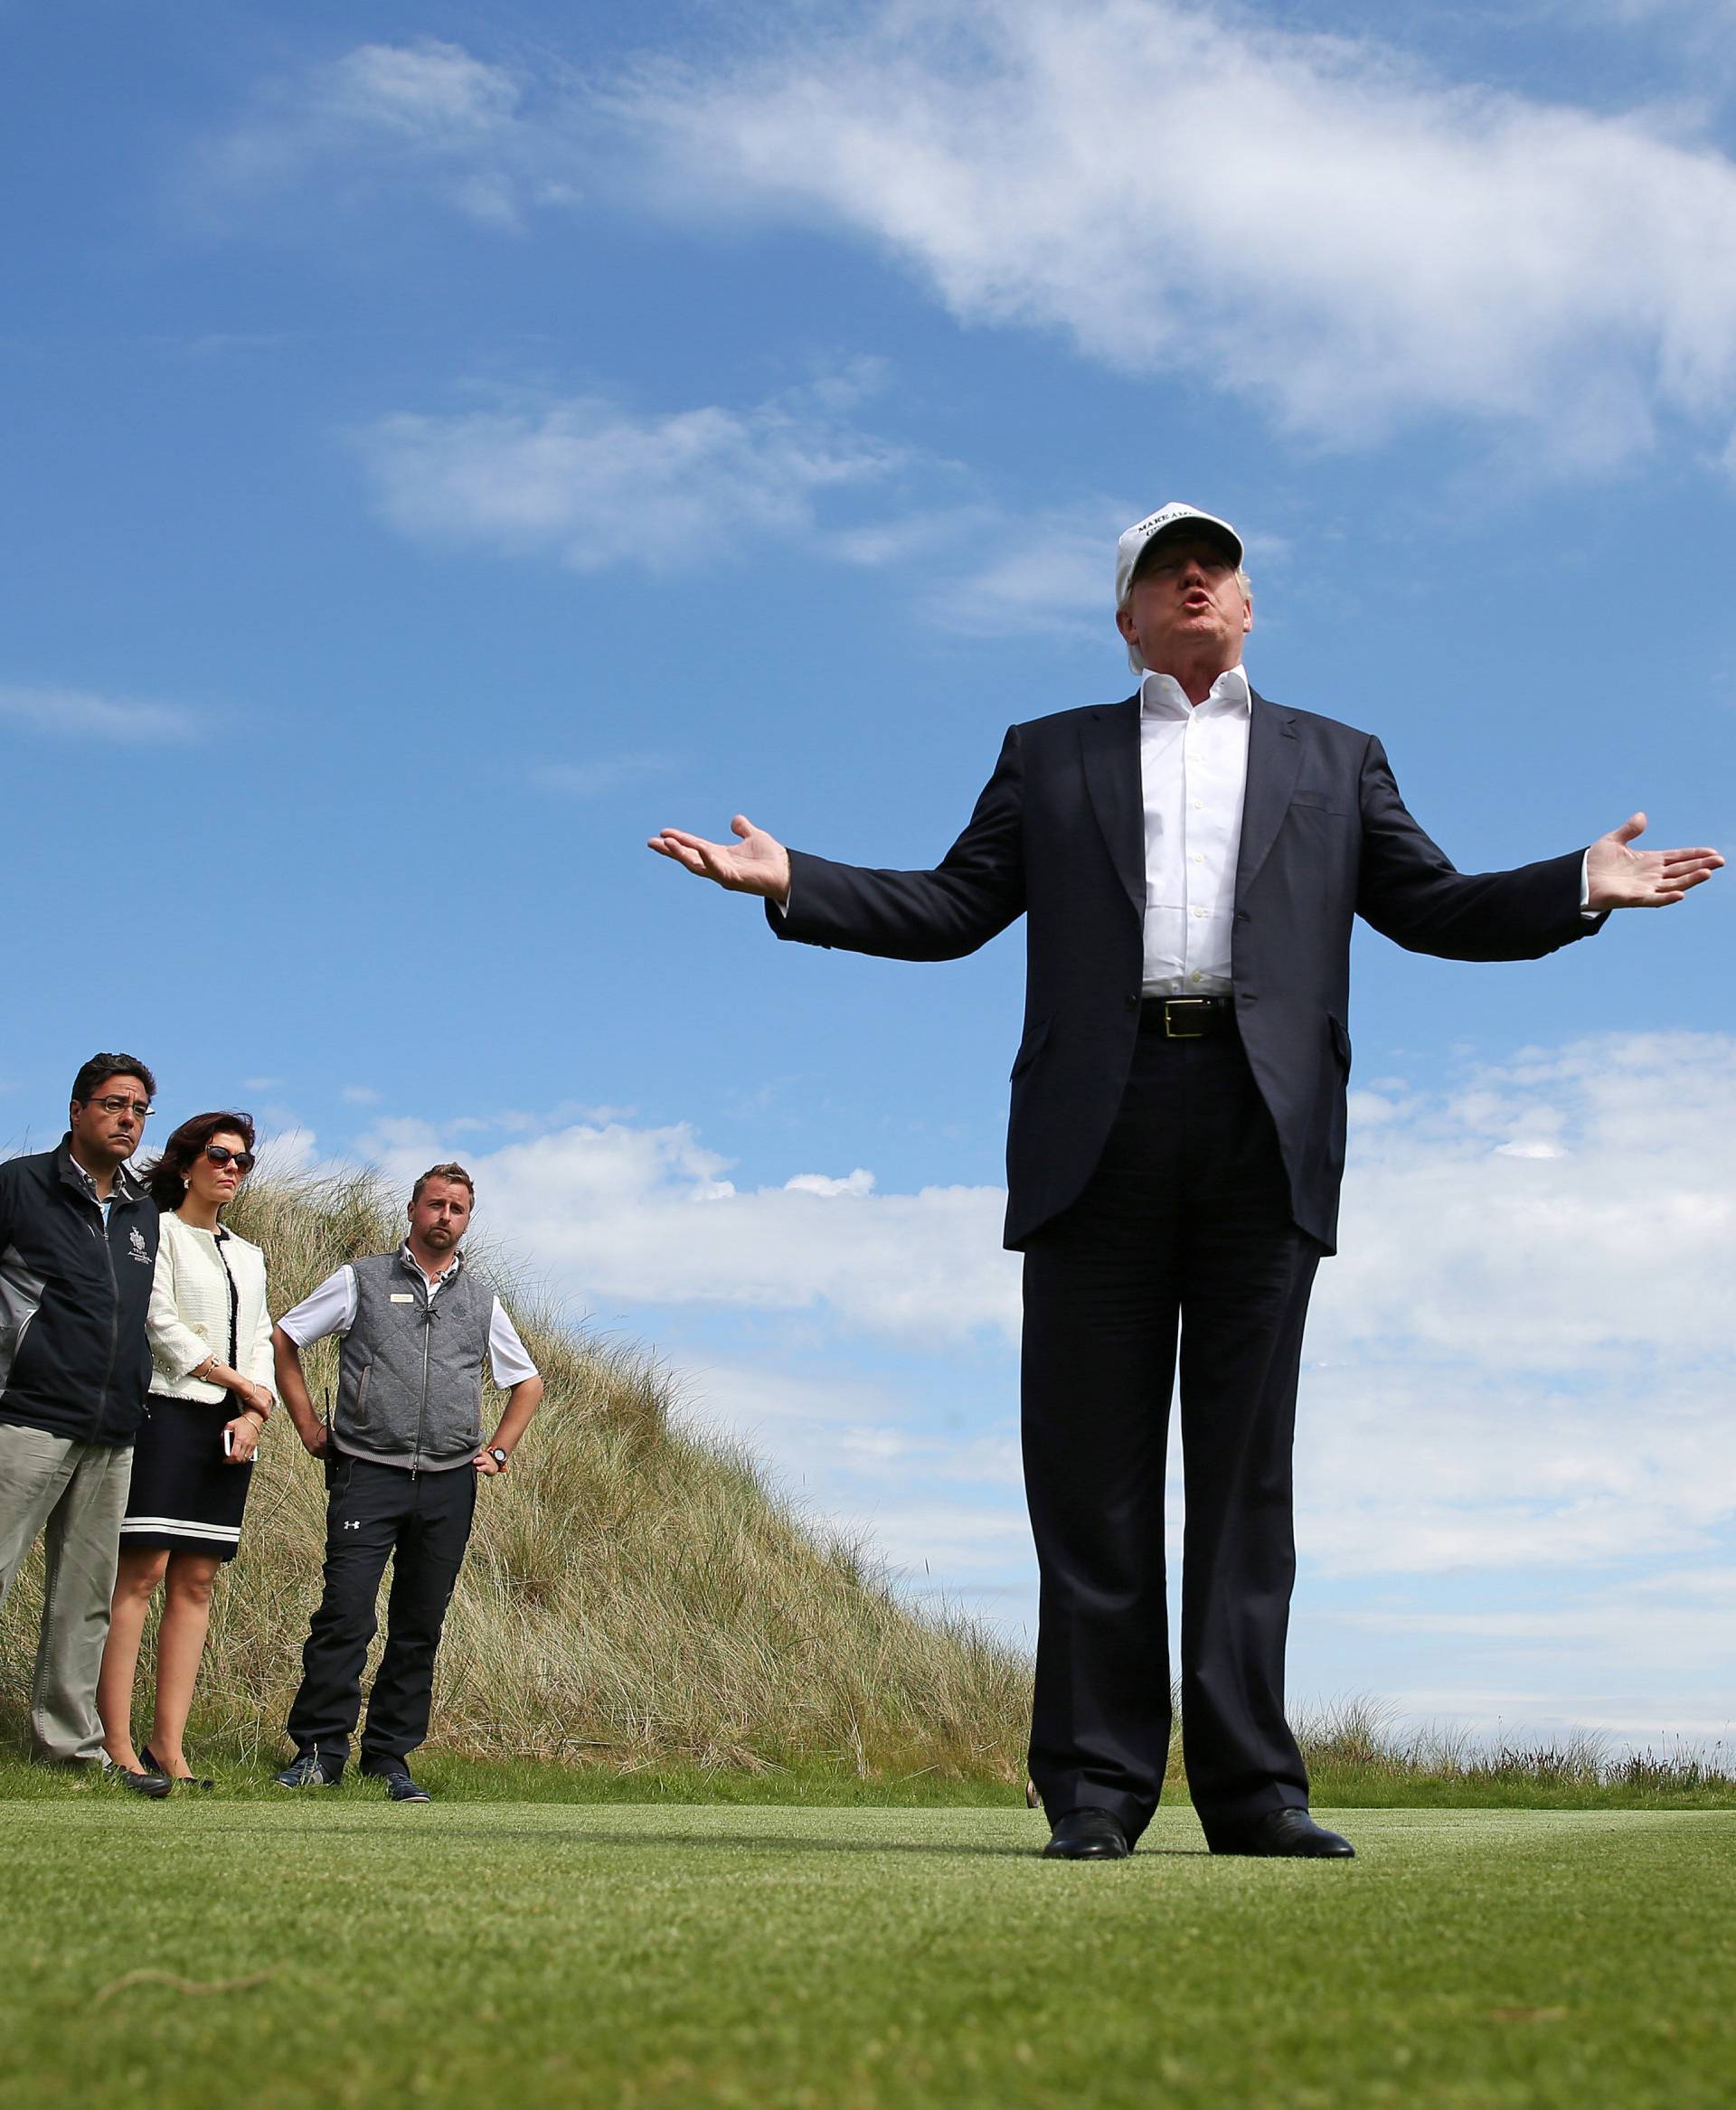 Republican presidential candidate Donald Trump speaks to the media on the golf course at his Trump International Golf Links in Aberdeen